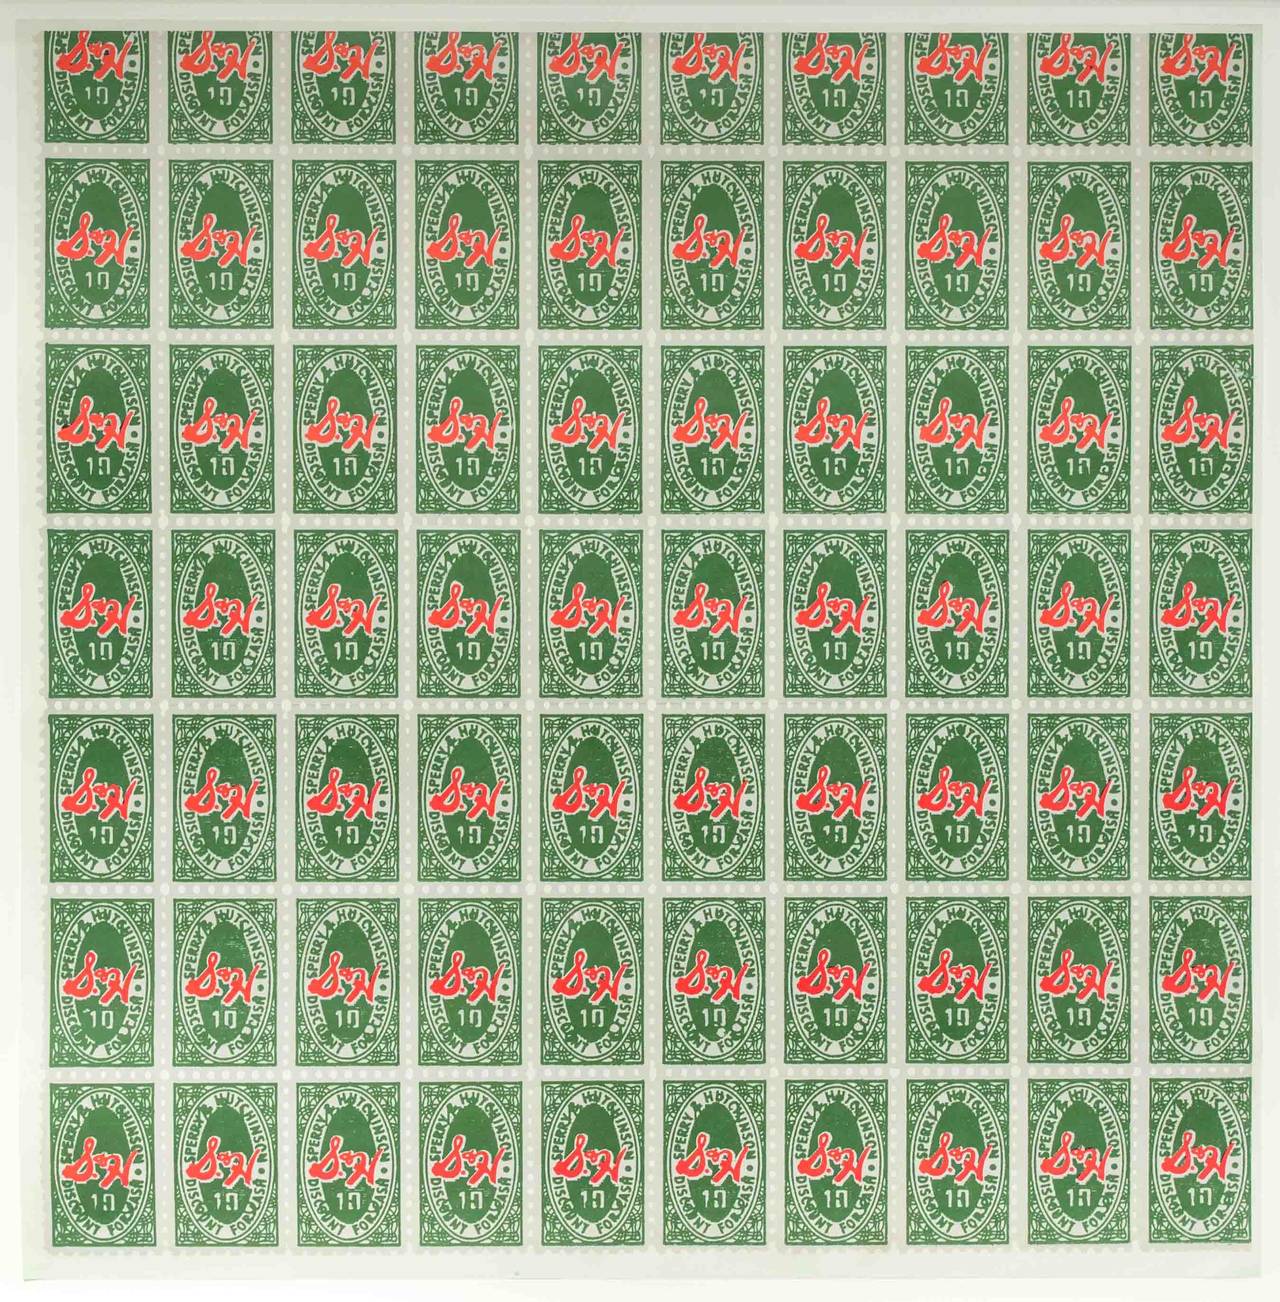 S & H Green Stamps, 1965 - Print by Andy Warhol